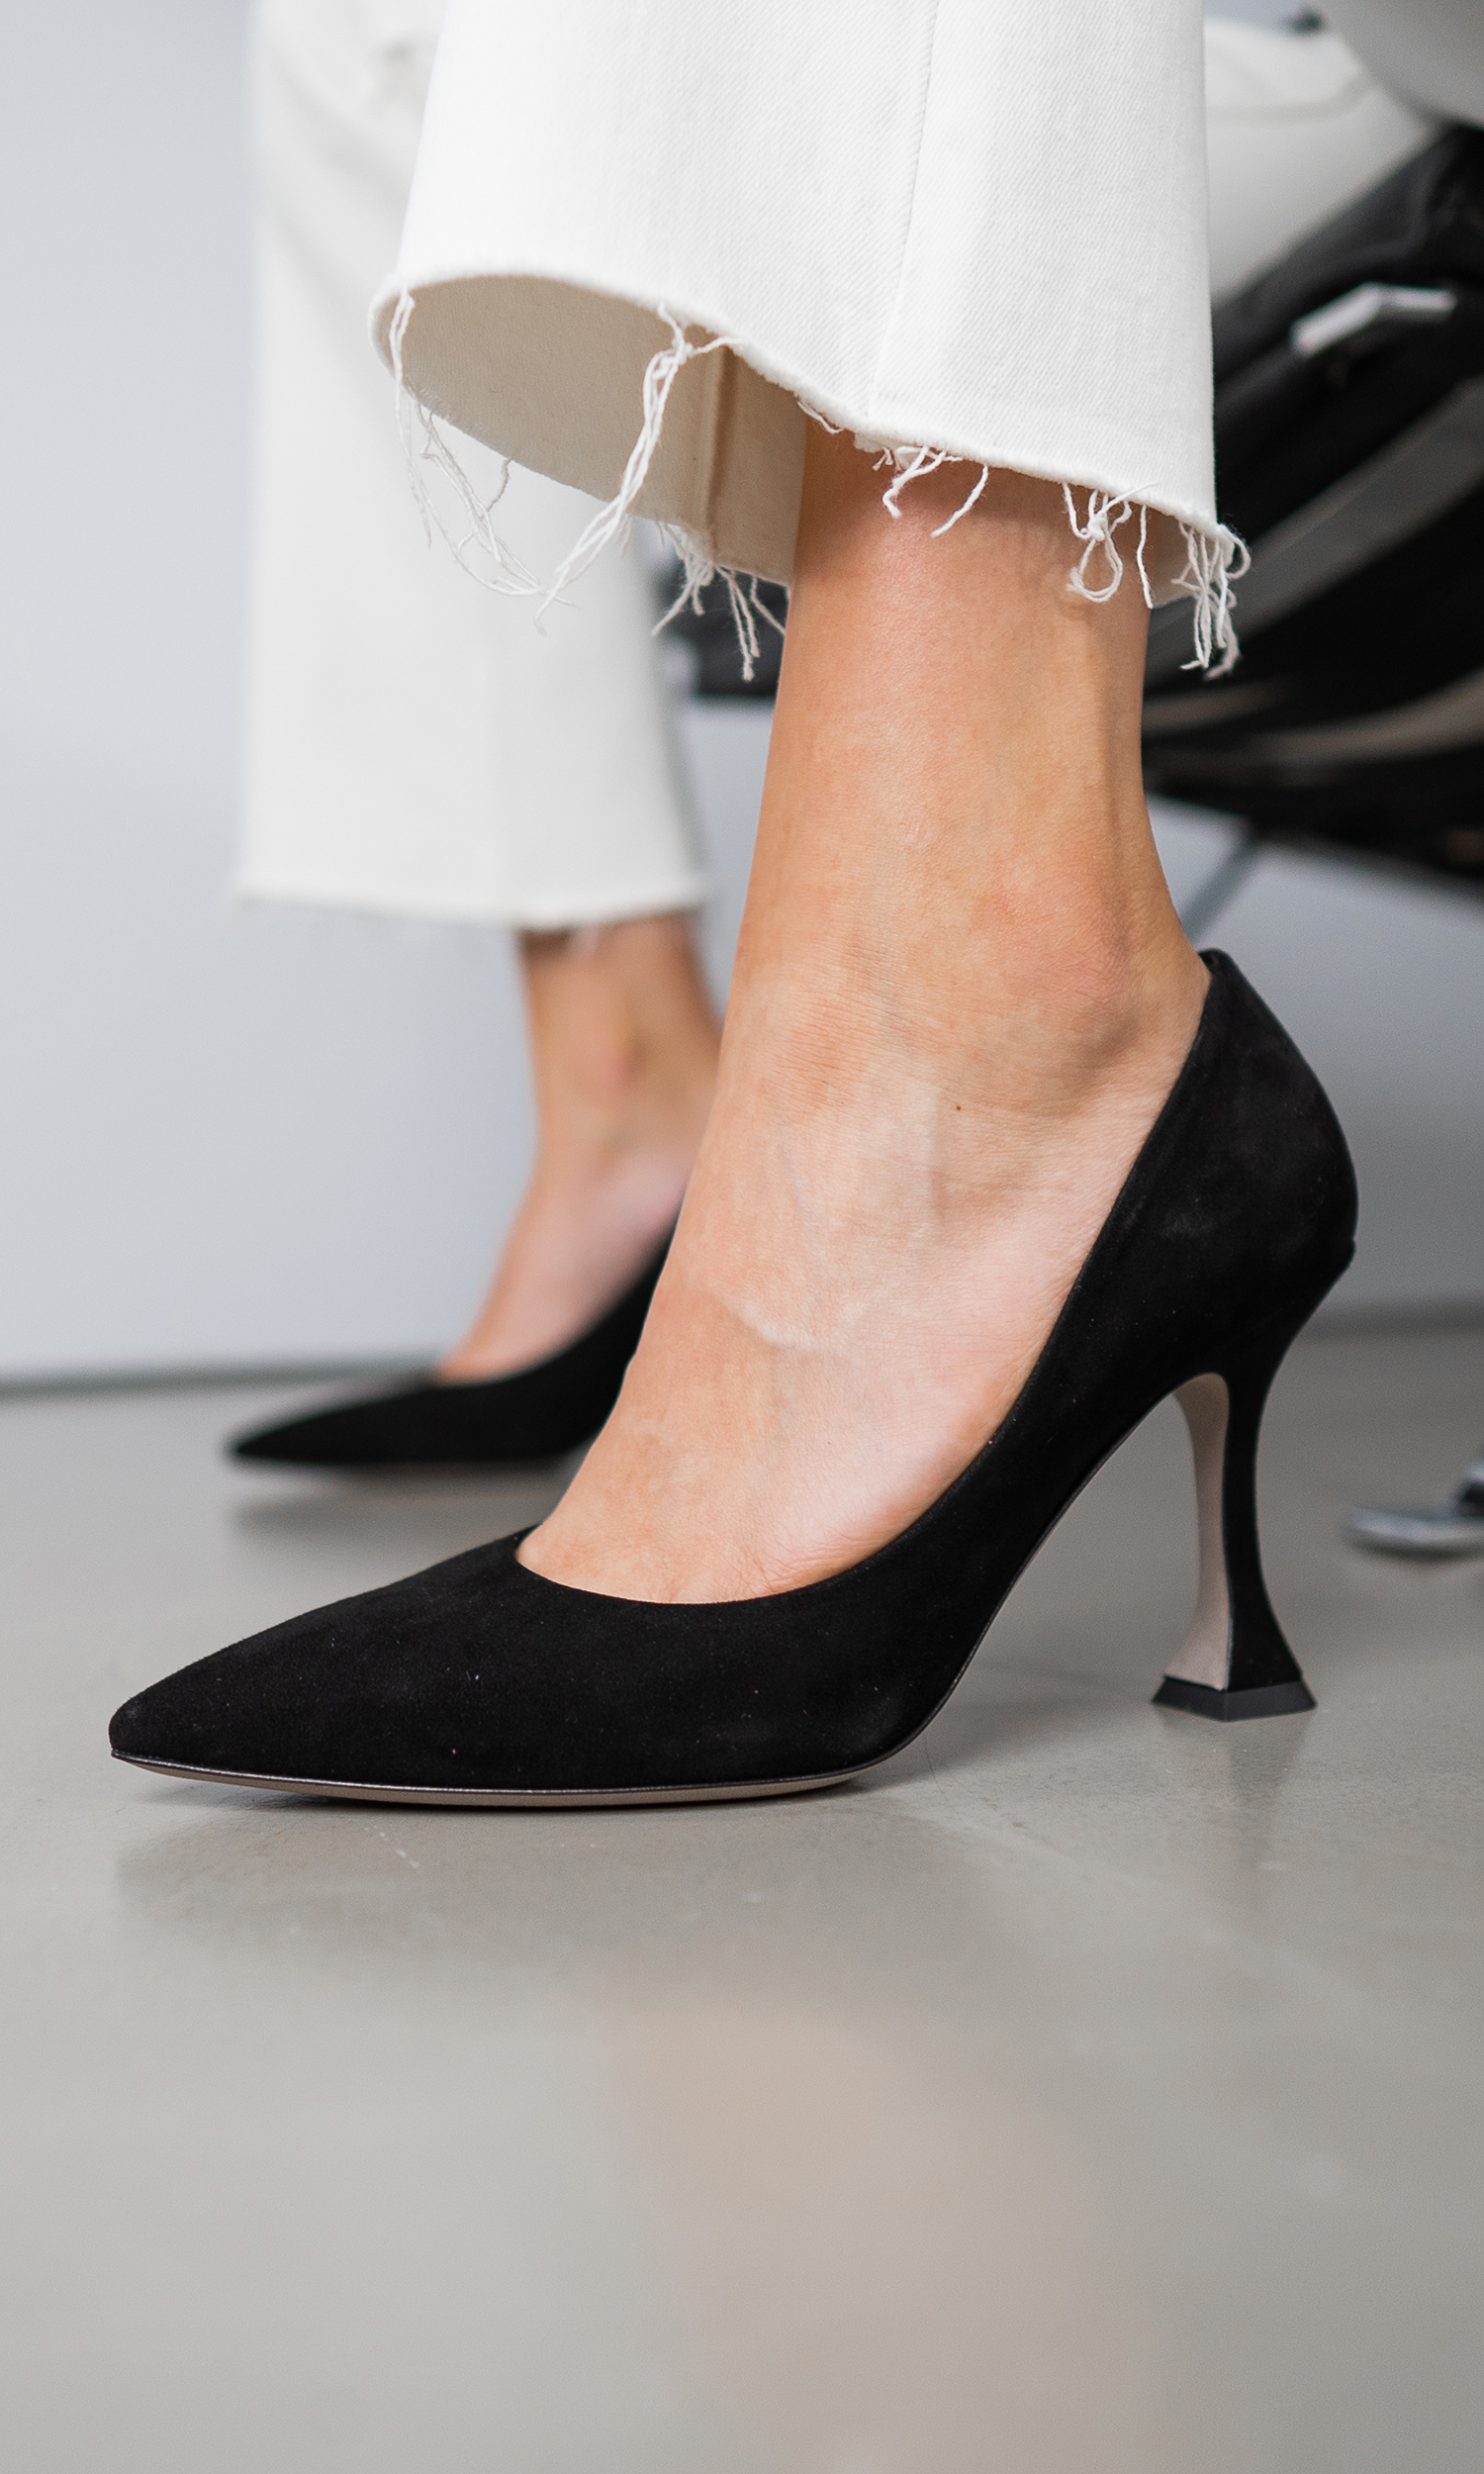 14 Ways To Make High Heels Comfortable and Step up Your Shoe Game